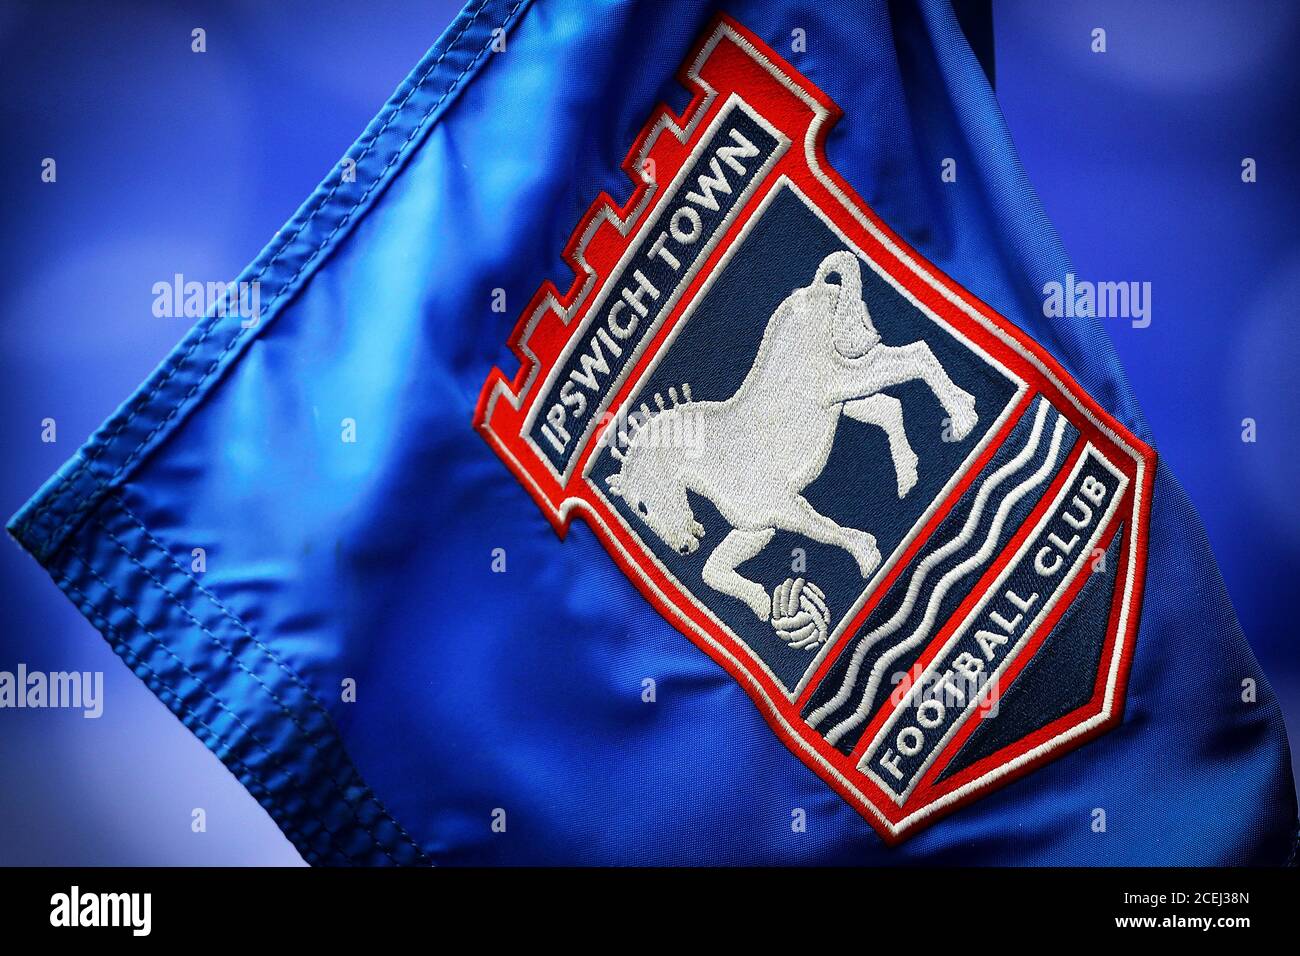 According to BBC reporter: The brilliant star at Ipswich Town Weekly salary, expected transfer value, contract situation…..